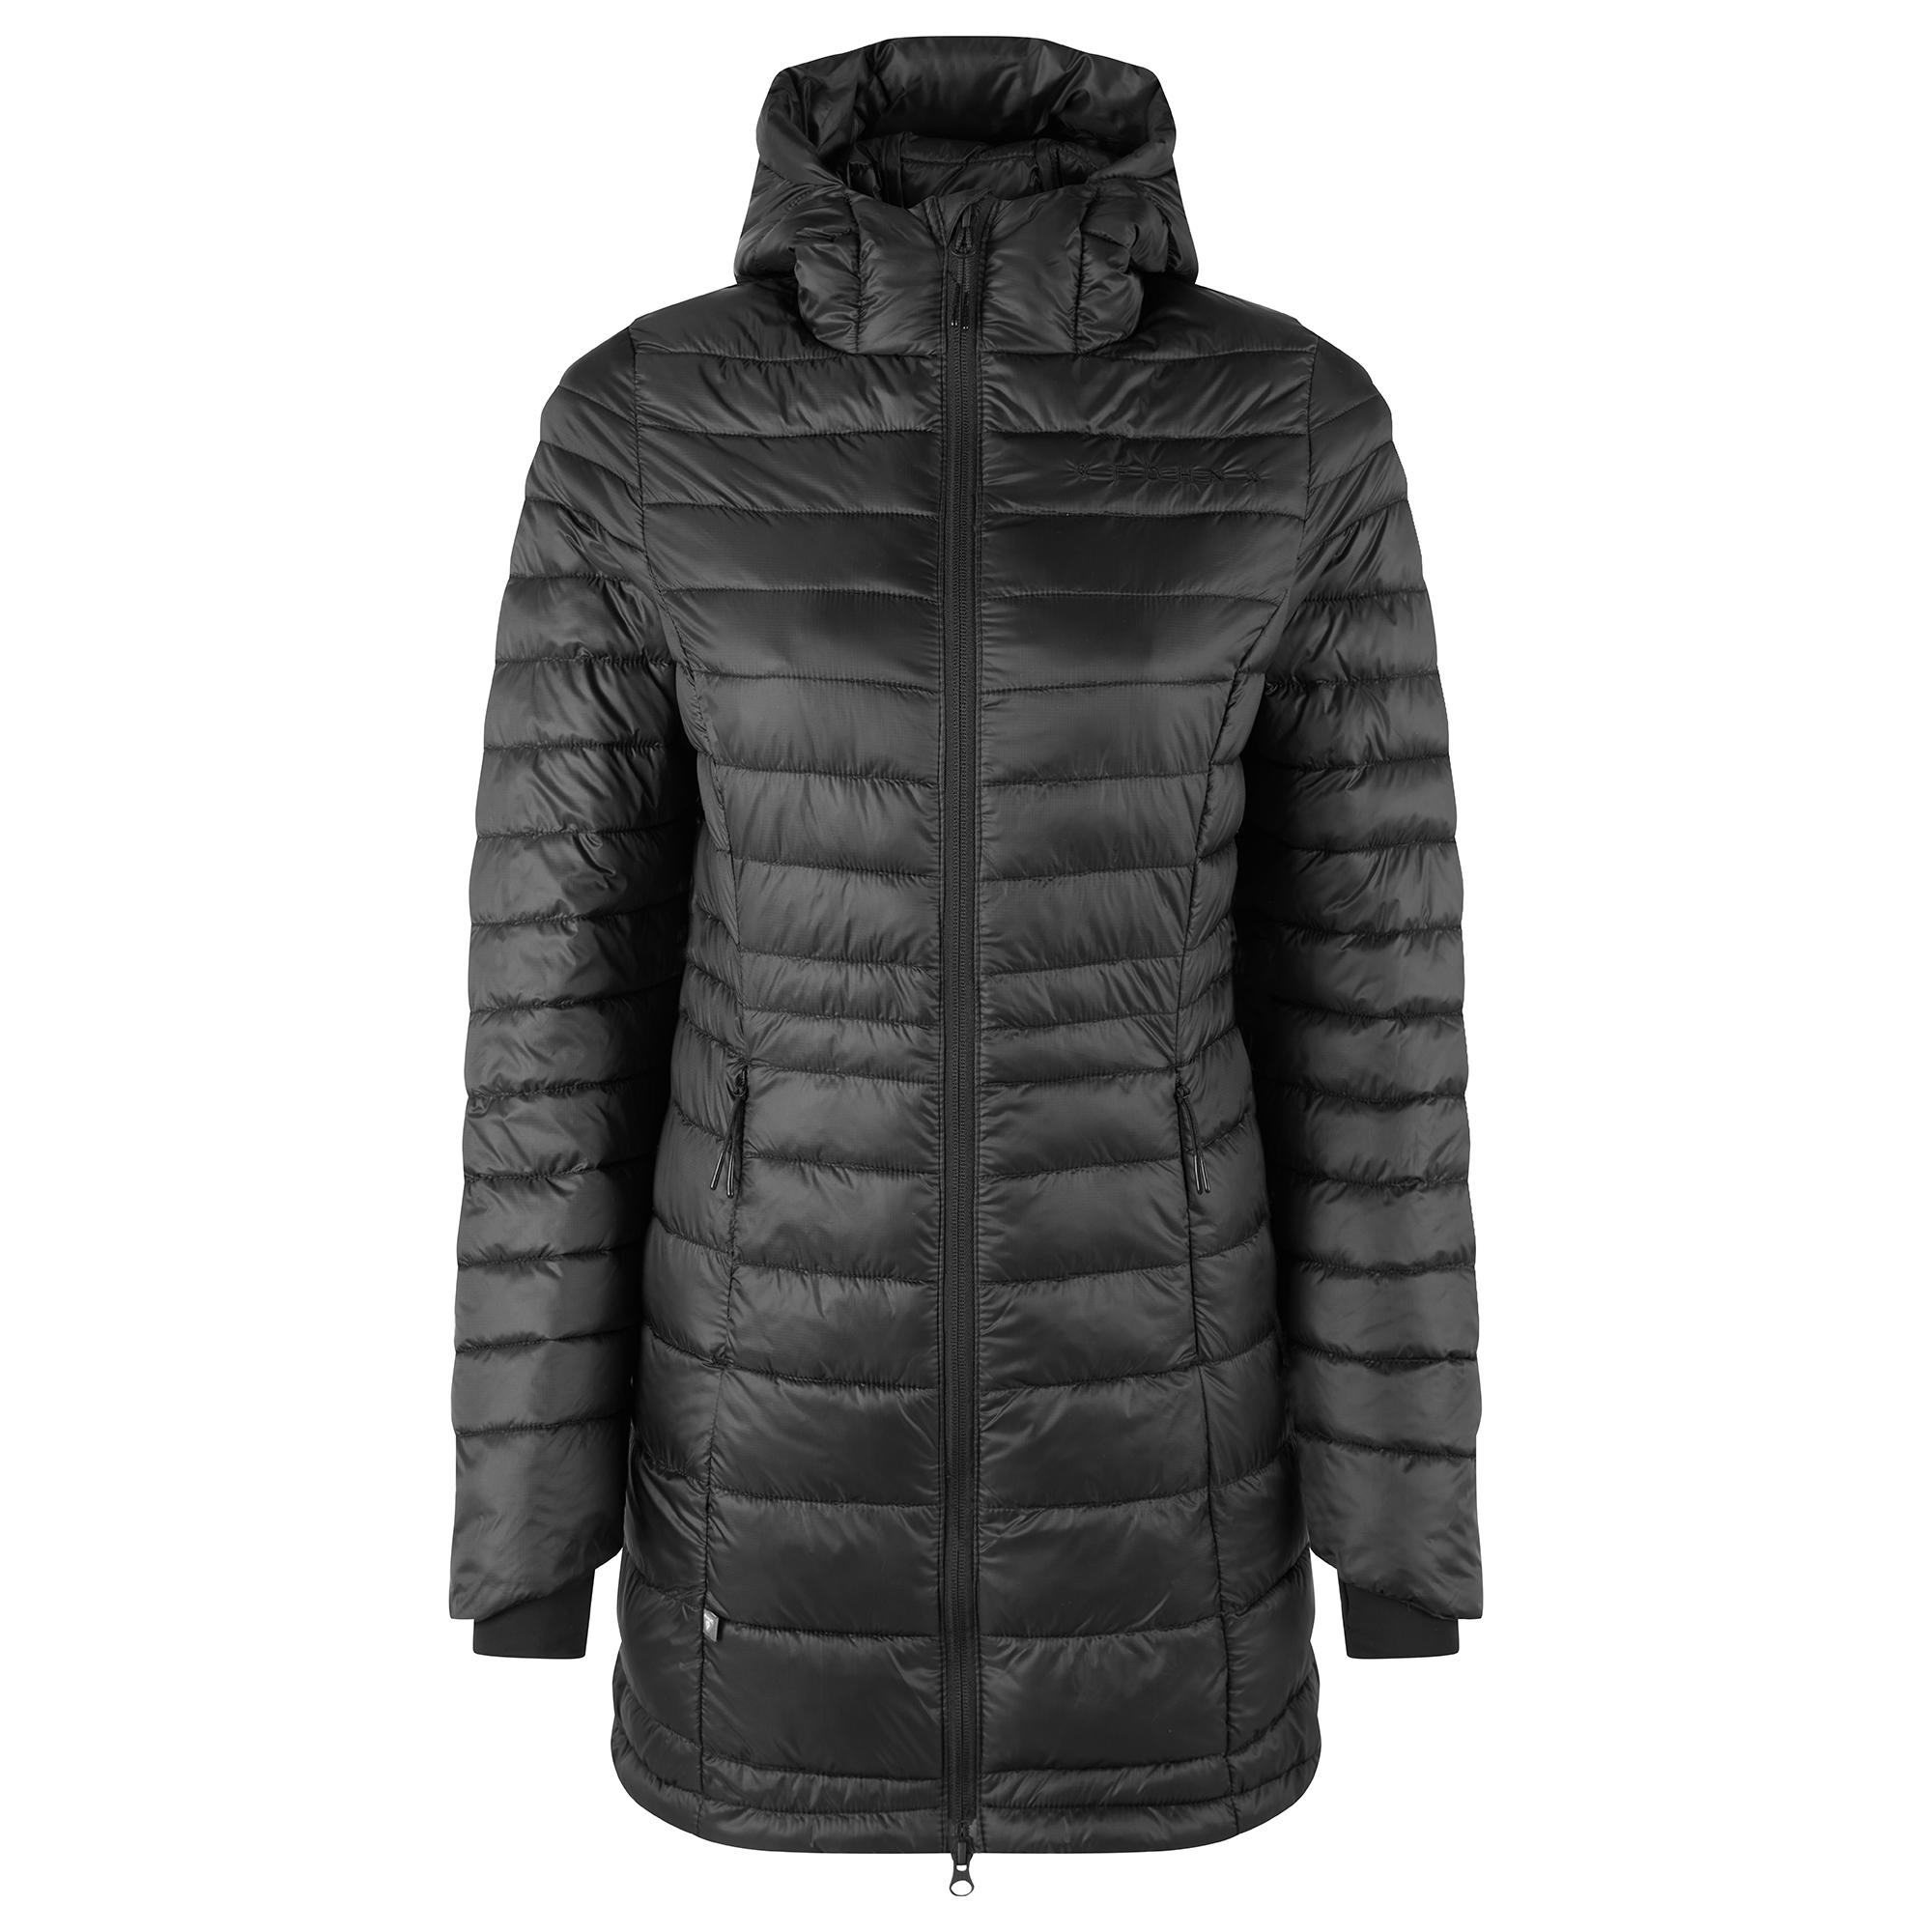 Fhn Womens Long Synthetic Down Jacket - Black